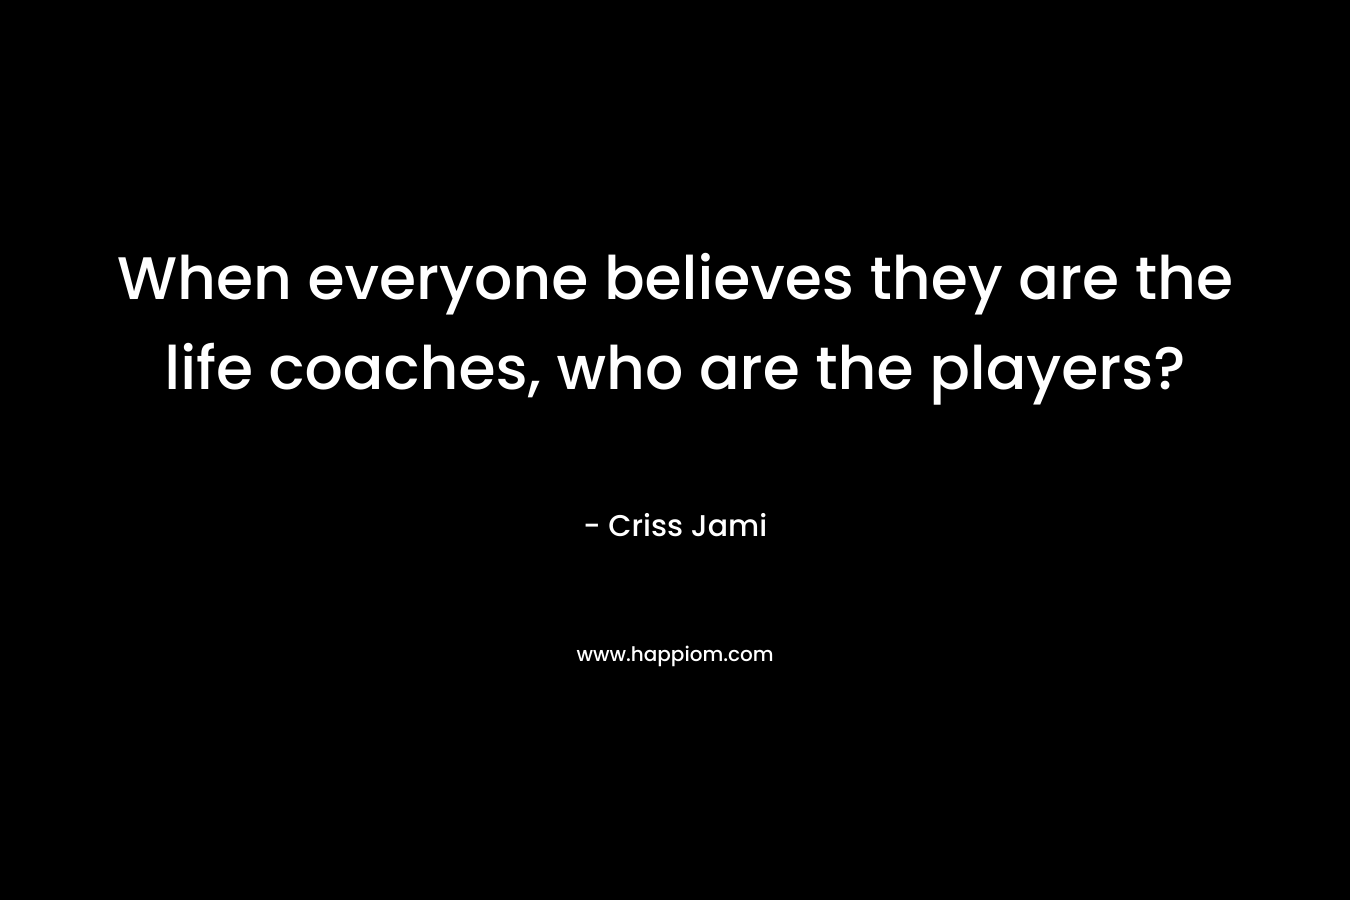 When everyone believes they are the life coaches, who are the players? – Criss Jami